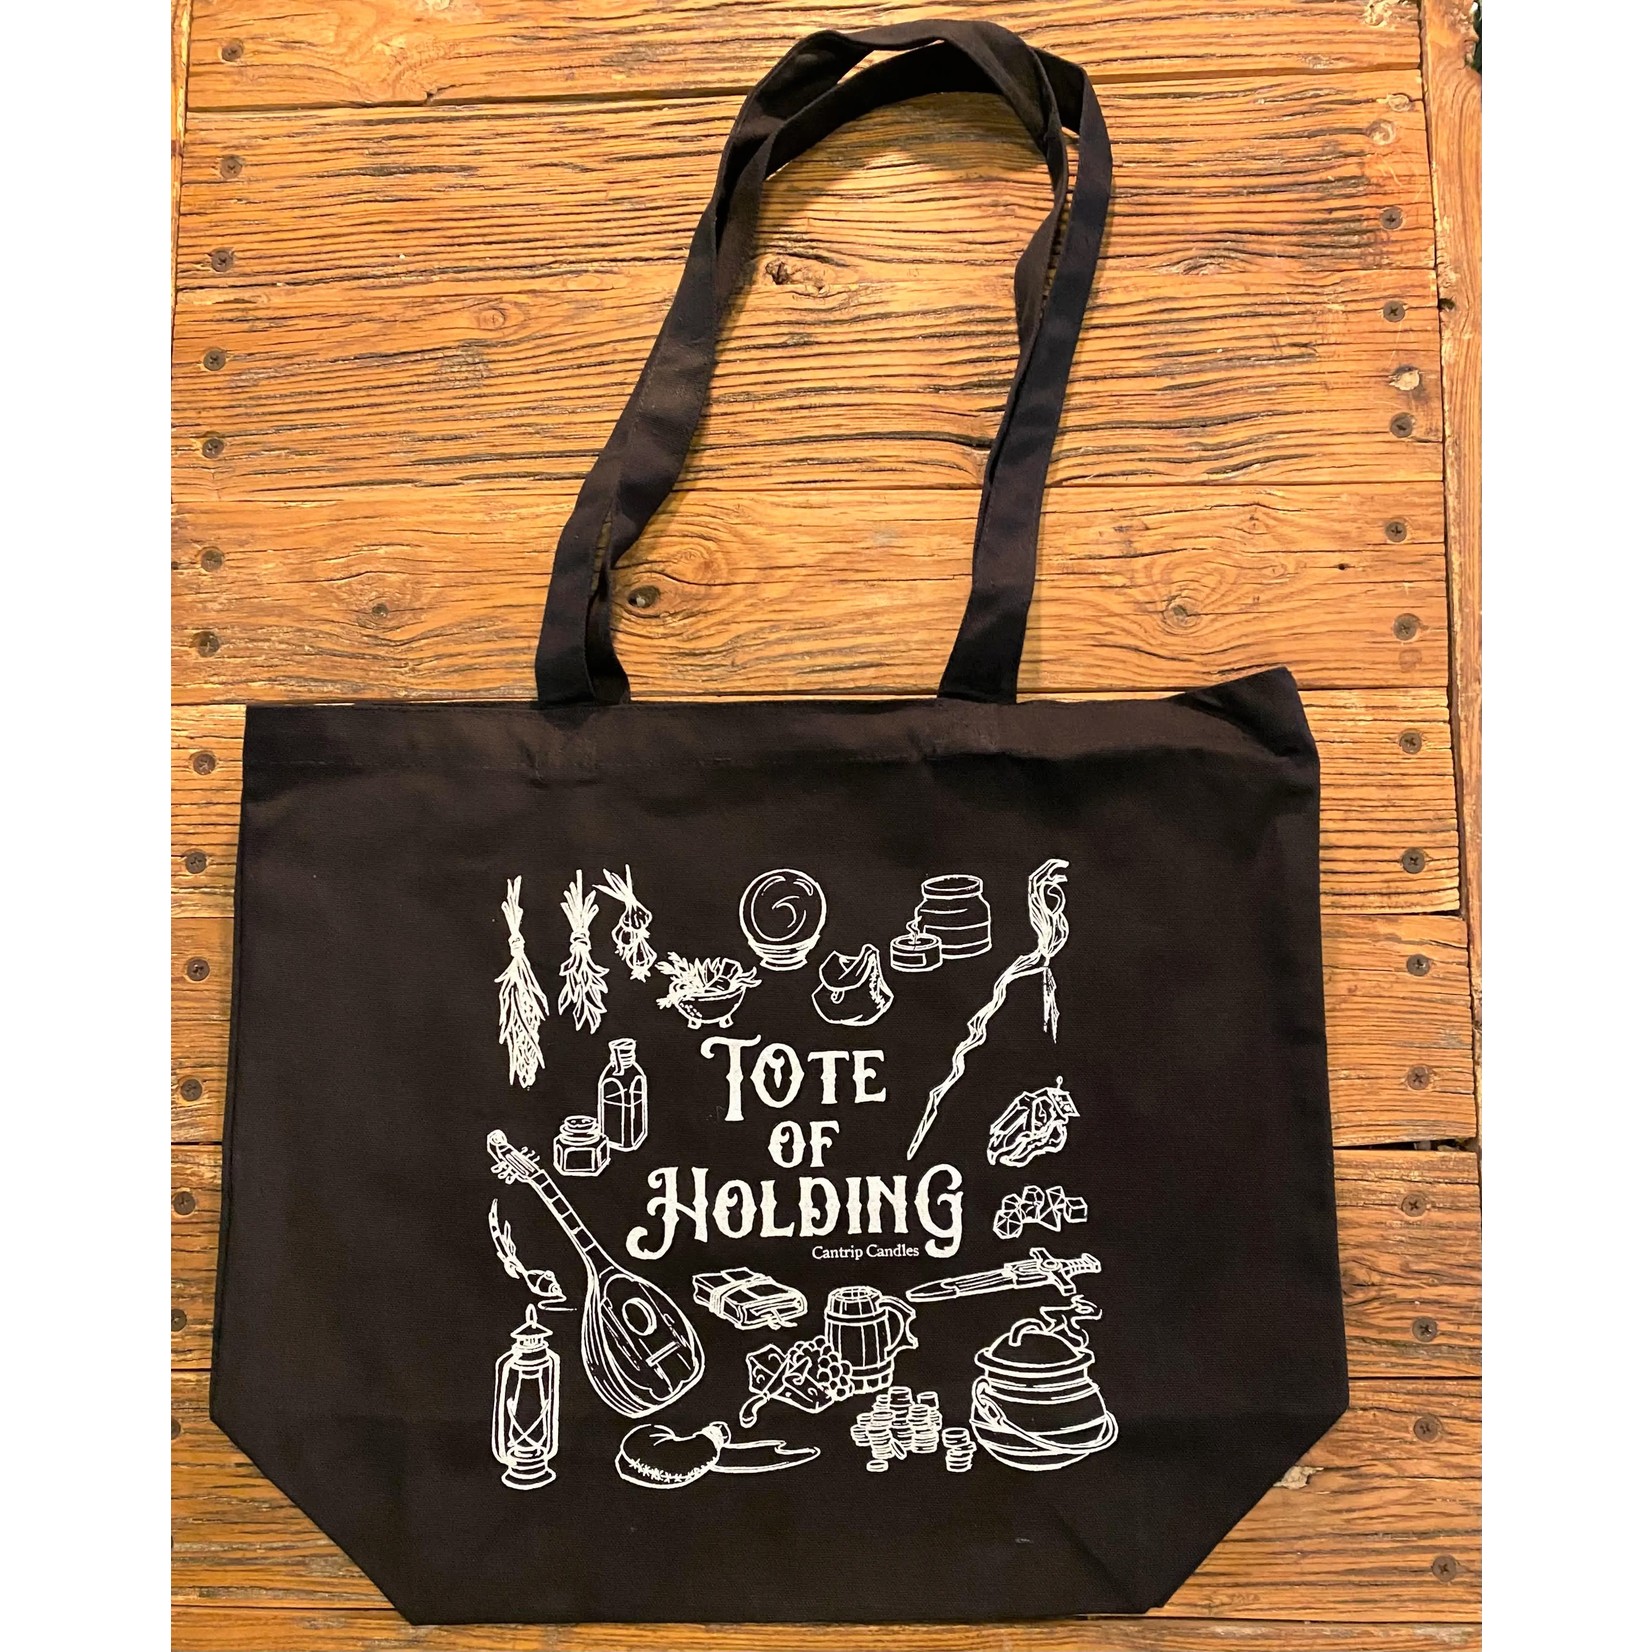 Tote of Holding